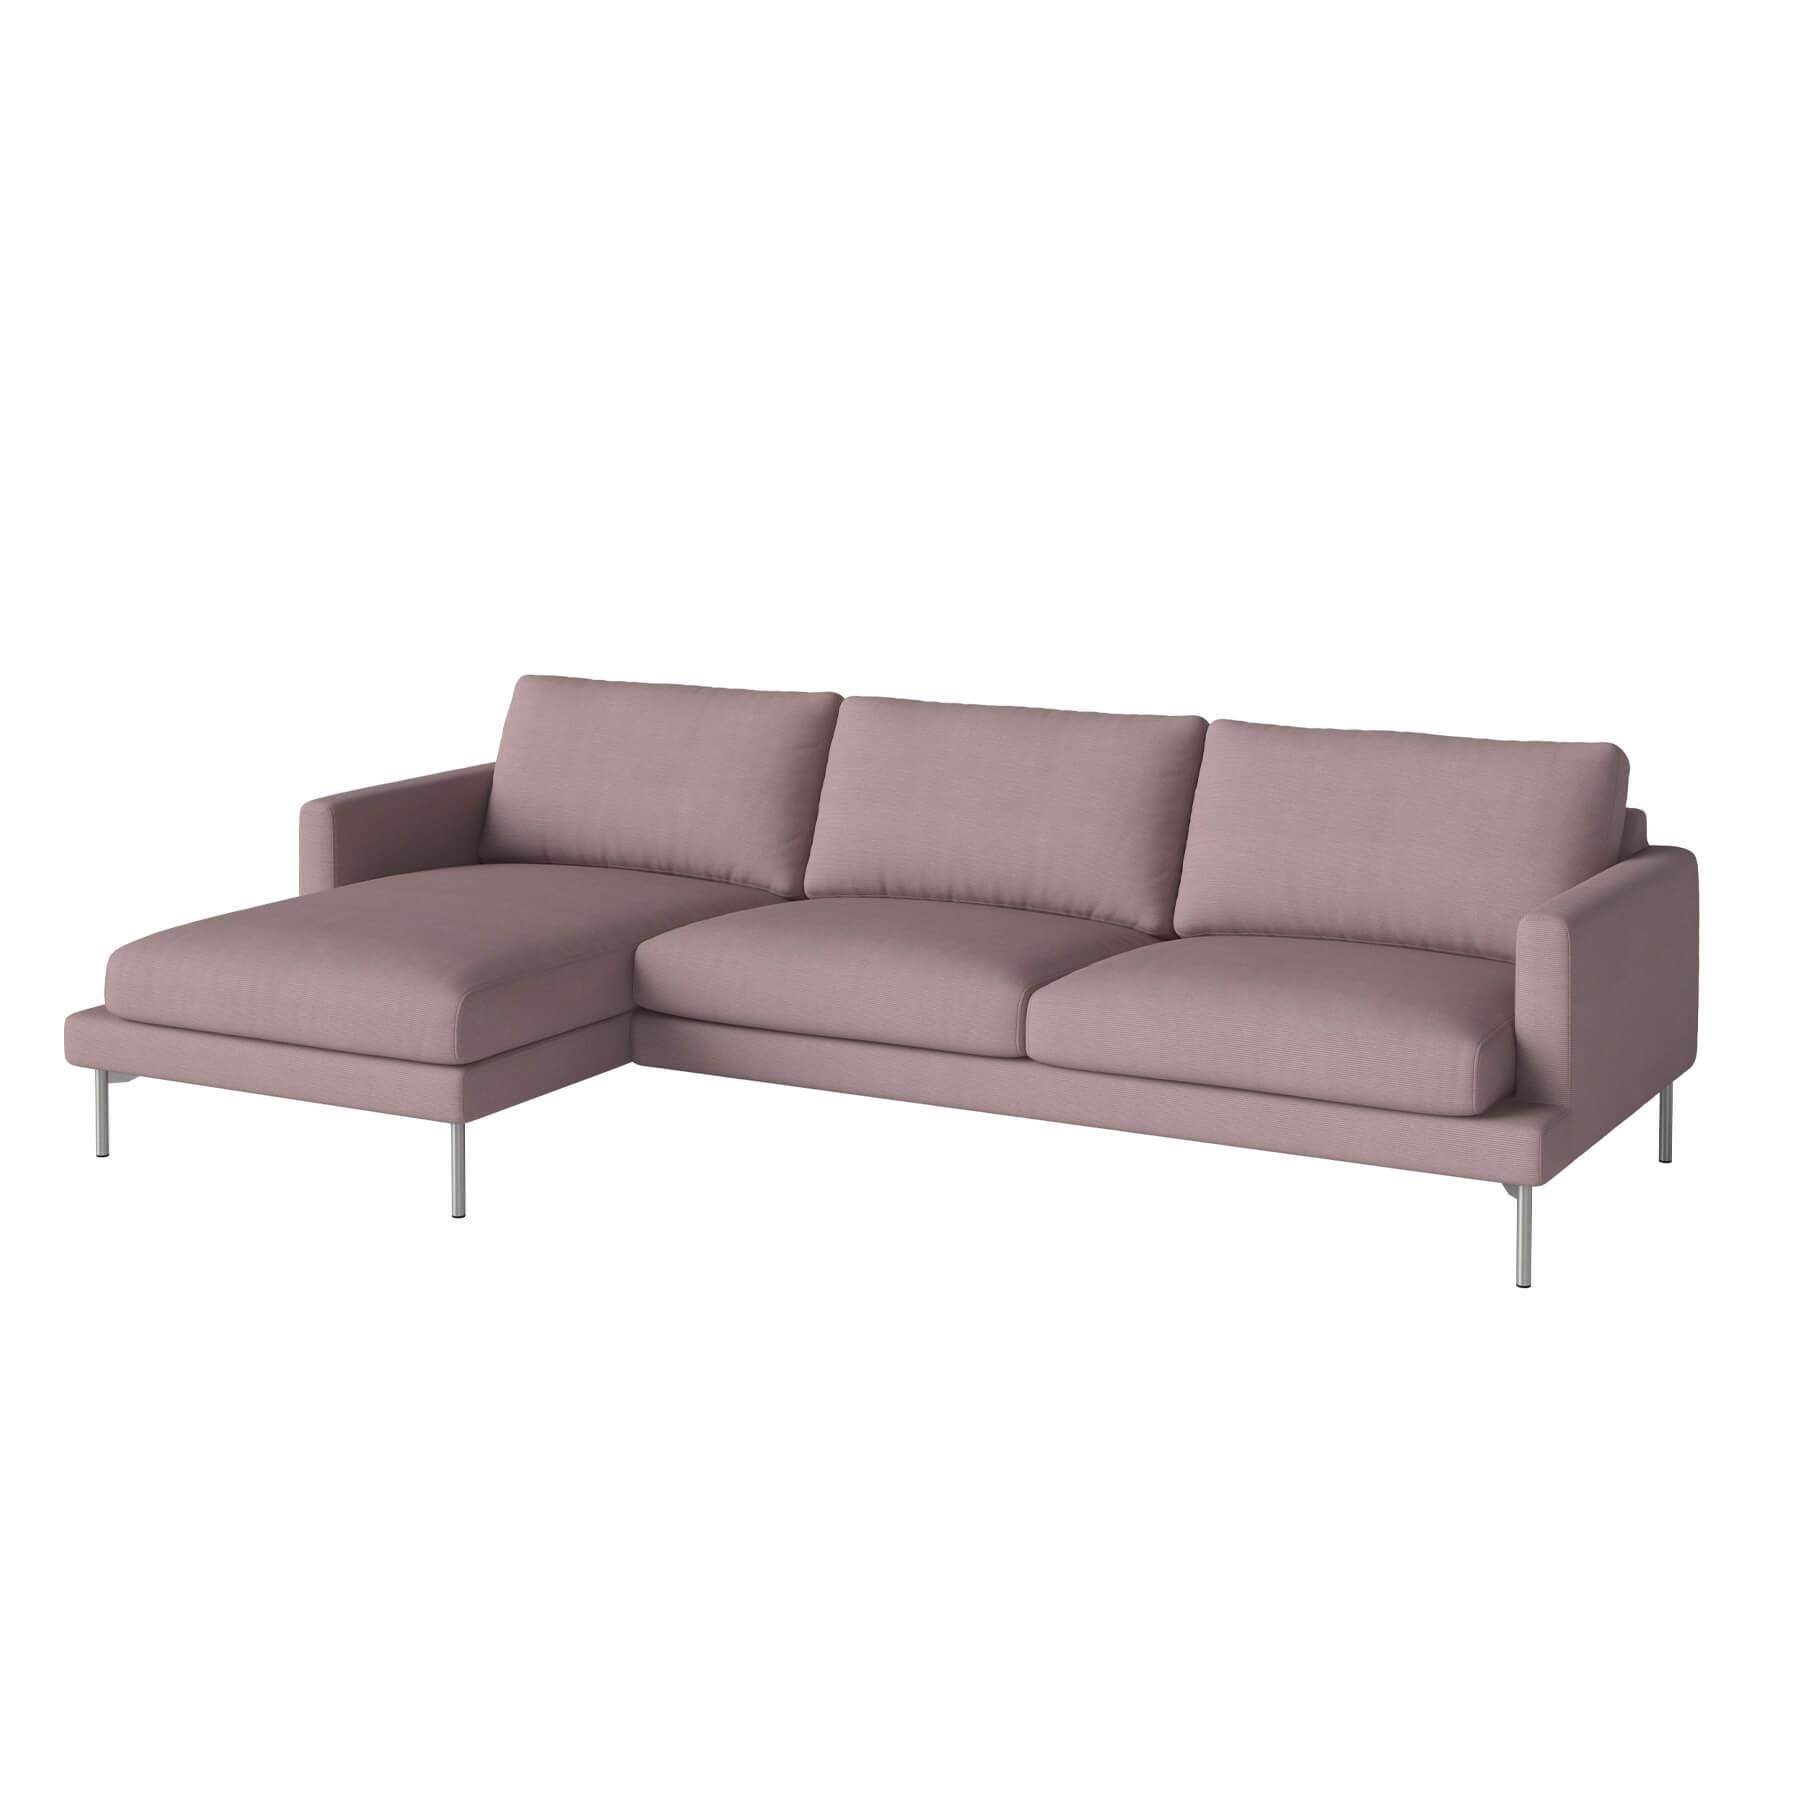 Bolia Veneda Sofa 35 Seater Sofa With Chaise Longue Brushed Steel Linea Rosa Left Pink Designer Furniture From Holloways Of Ludlow